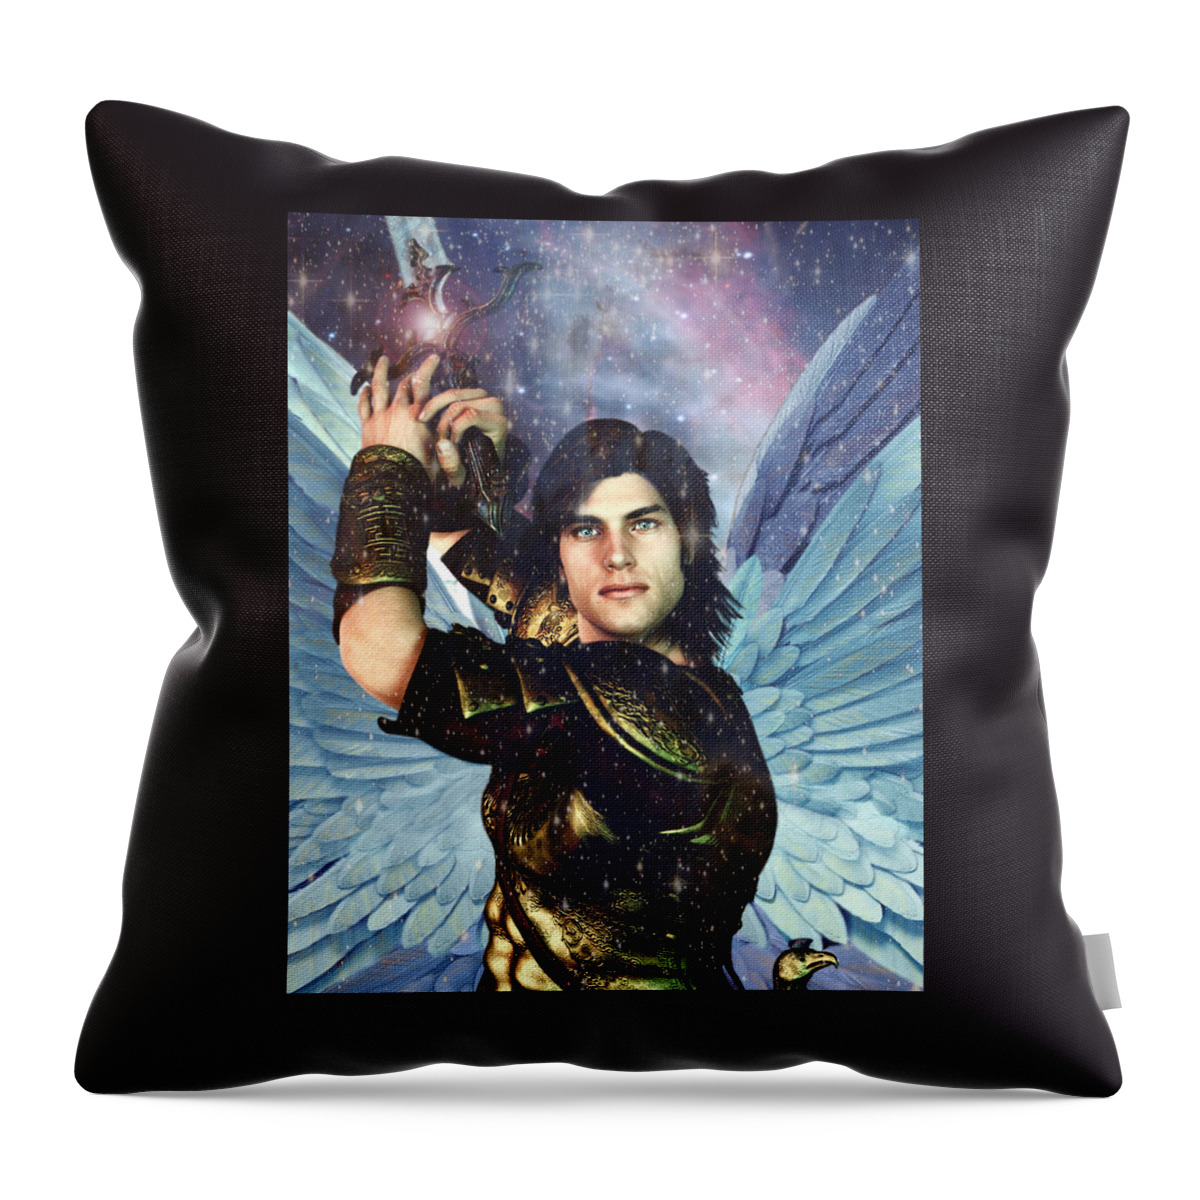 Saint Michael Throw Pillow featuring the painting Prince of the Heavenly Host Saint Michael by Suzanne Silvir